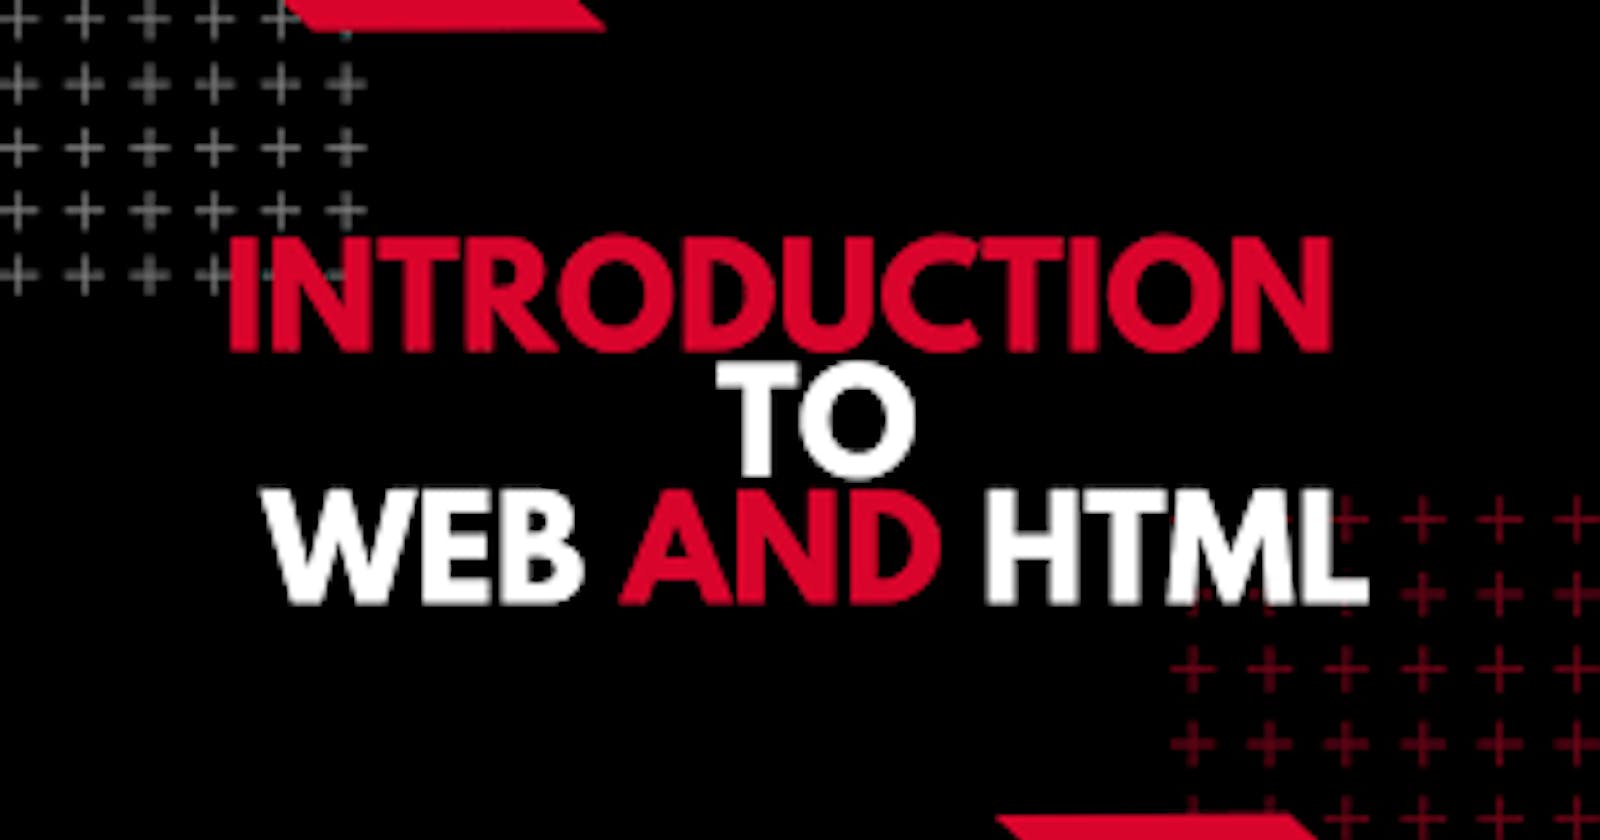 Introduction to Web And HTML